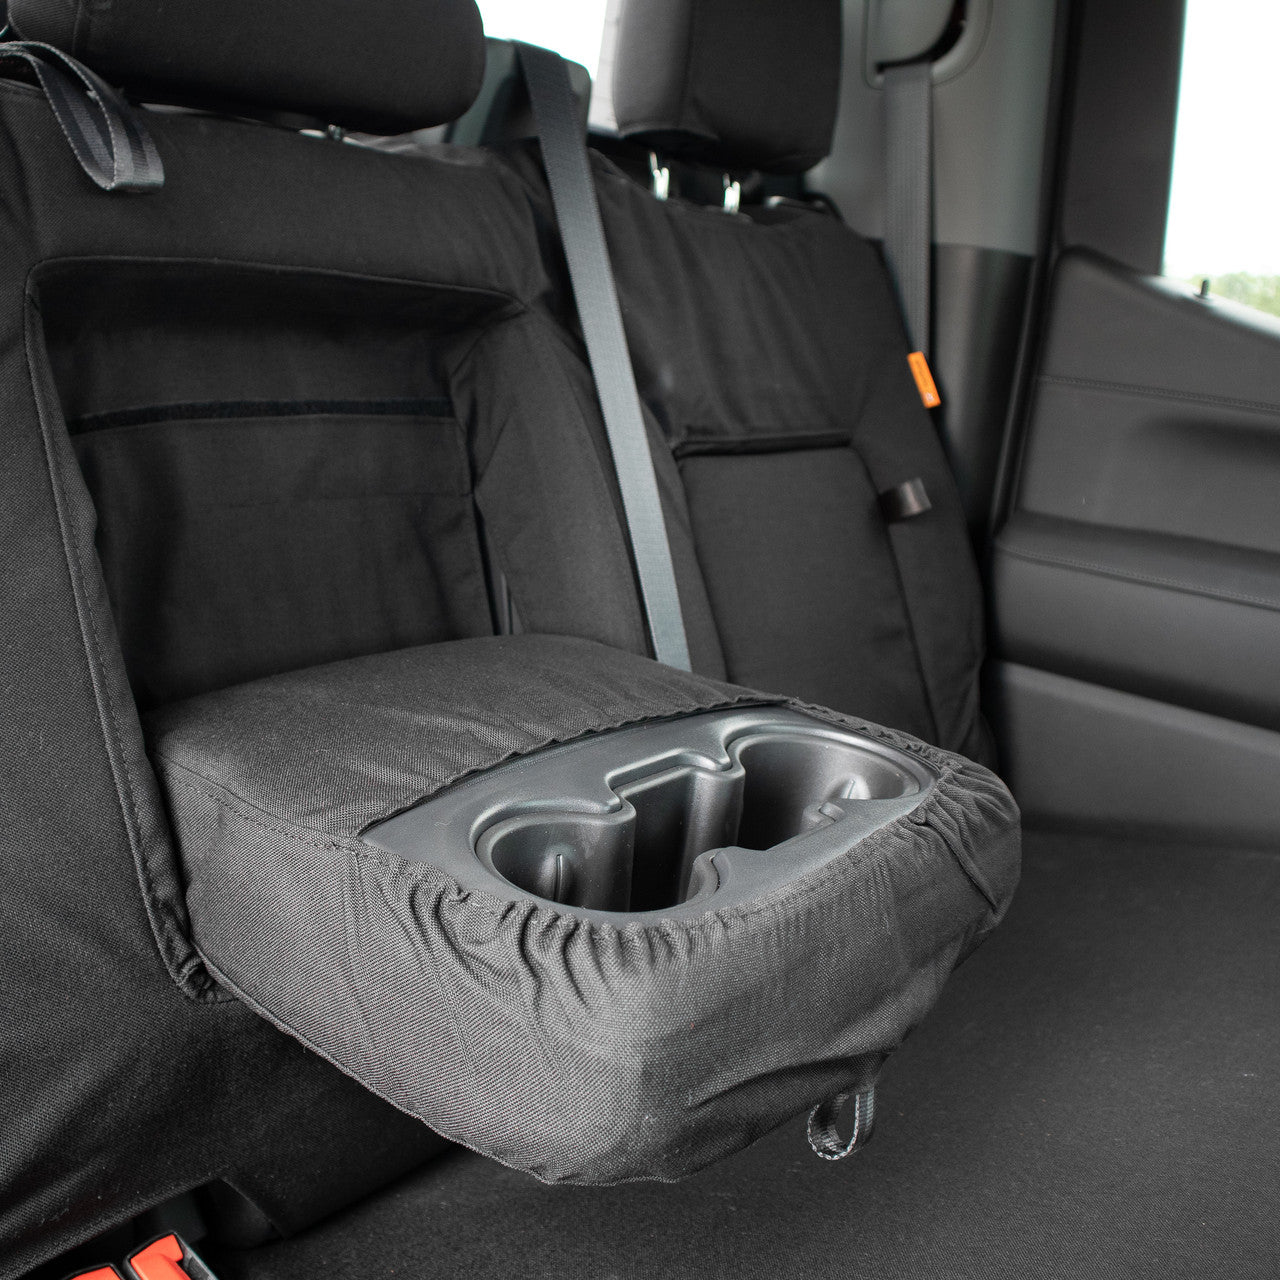 Seat cover allows all factory seat features to be accessible